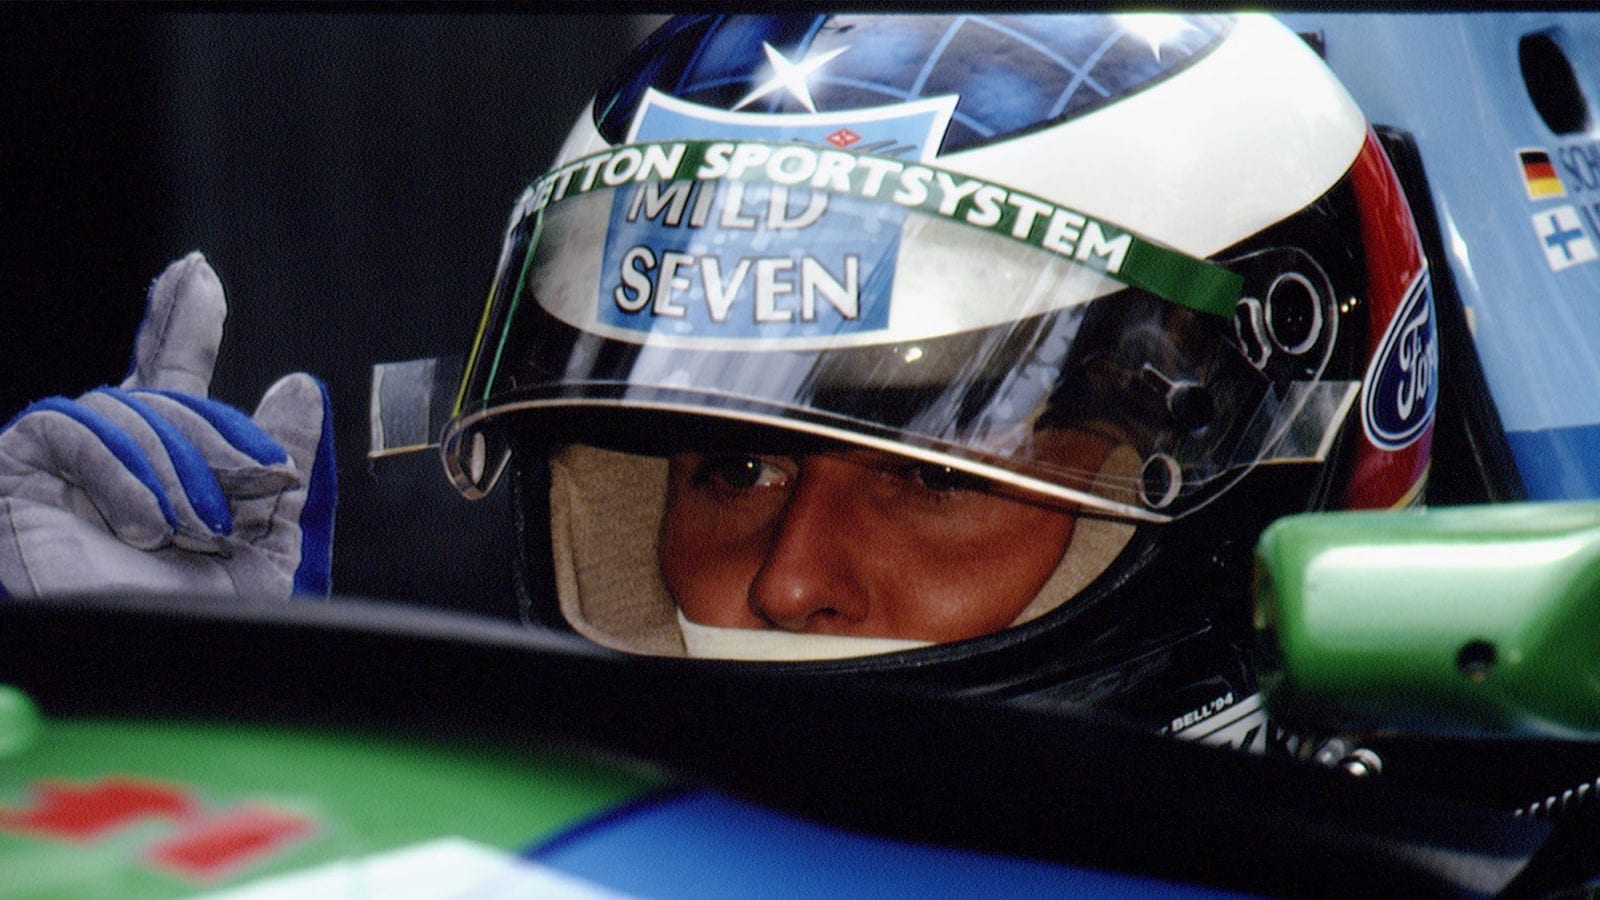 Michael Schumacher peers out from behind his helmet in the 1994 Benetton Ford